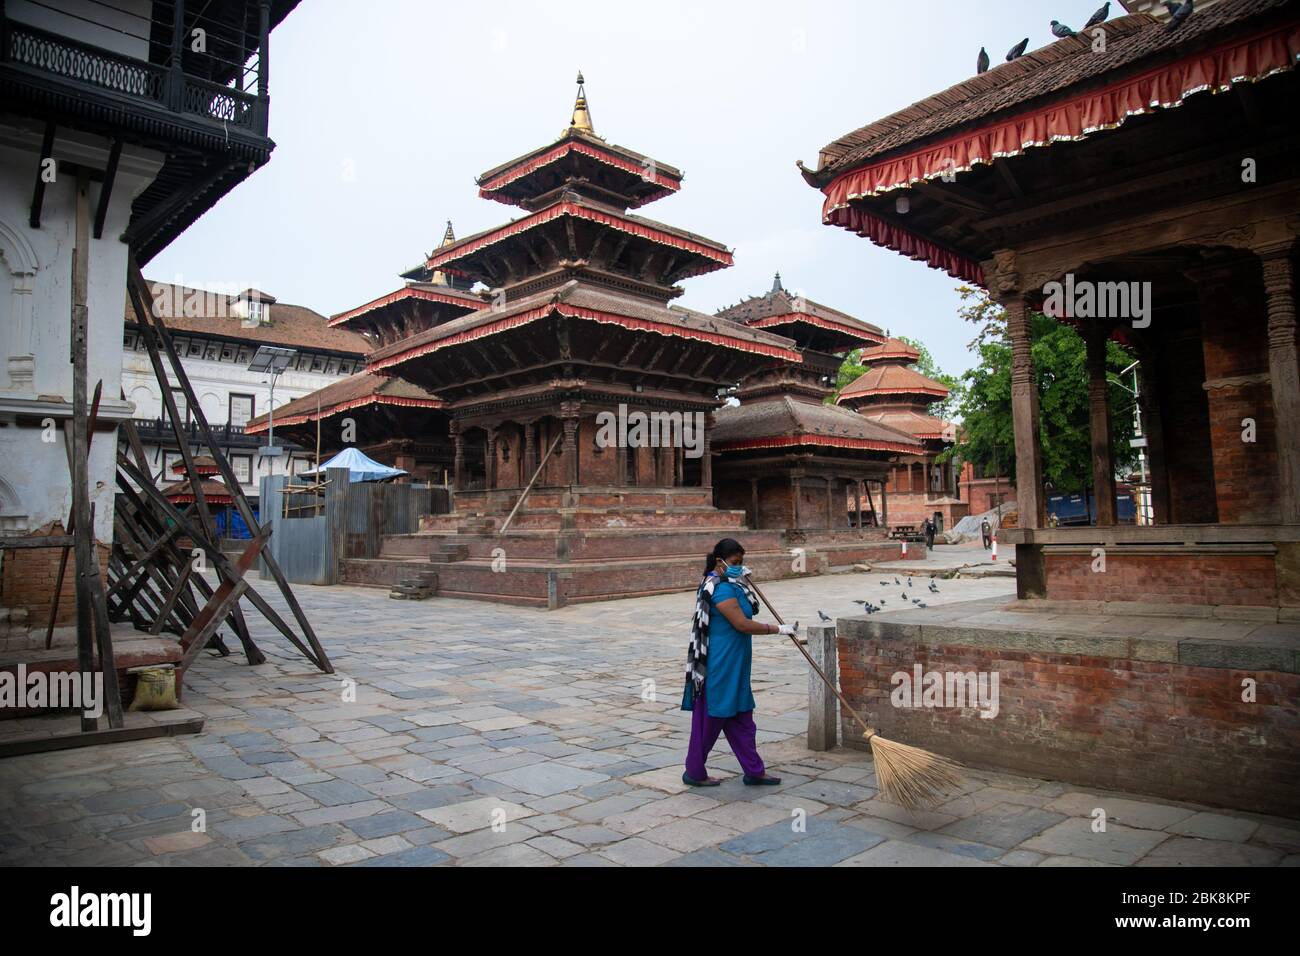 May 1, 2020, Kathmandu, Nepal: A female worker cleans the Kathmandu durbar square area during the International labour day amid the nationwide lockdown imposed by the government amid concerns about the spread of the coronavirus disease (COVID-19).On the occasion of International Workers Day or Labour Day is observed all over the world on the first day of May, the history of this day dates back to the 19th century, when revolutions took place in the United States. It was during the rise of industrialisation that the labour-class was oppressed to the point of having to take a stand. (Credit Ima Stock Photo